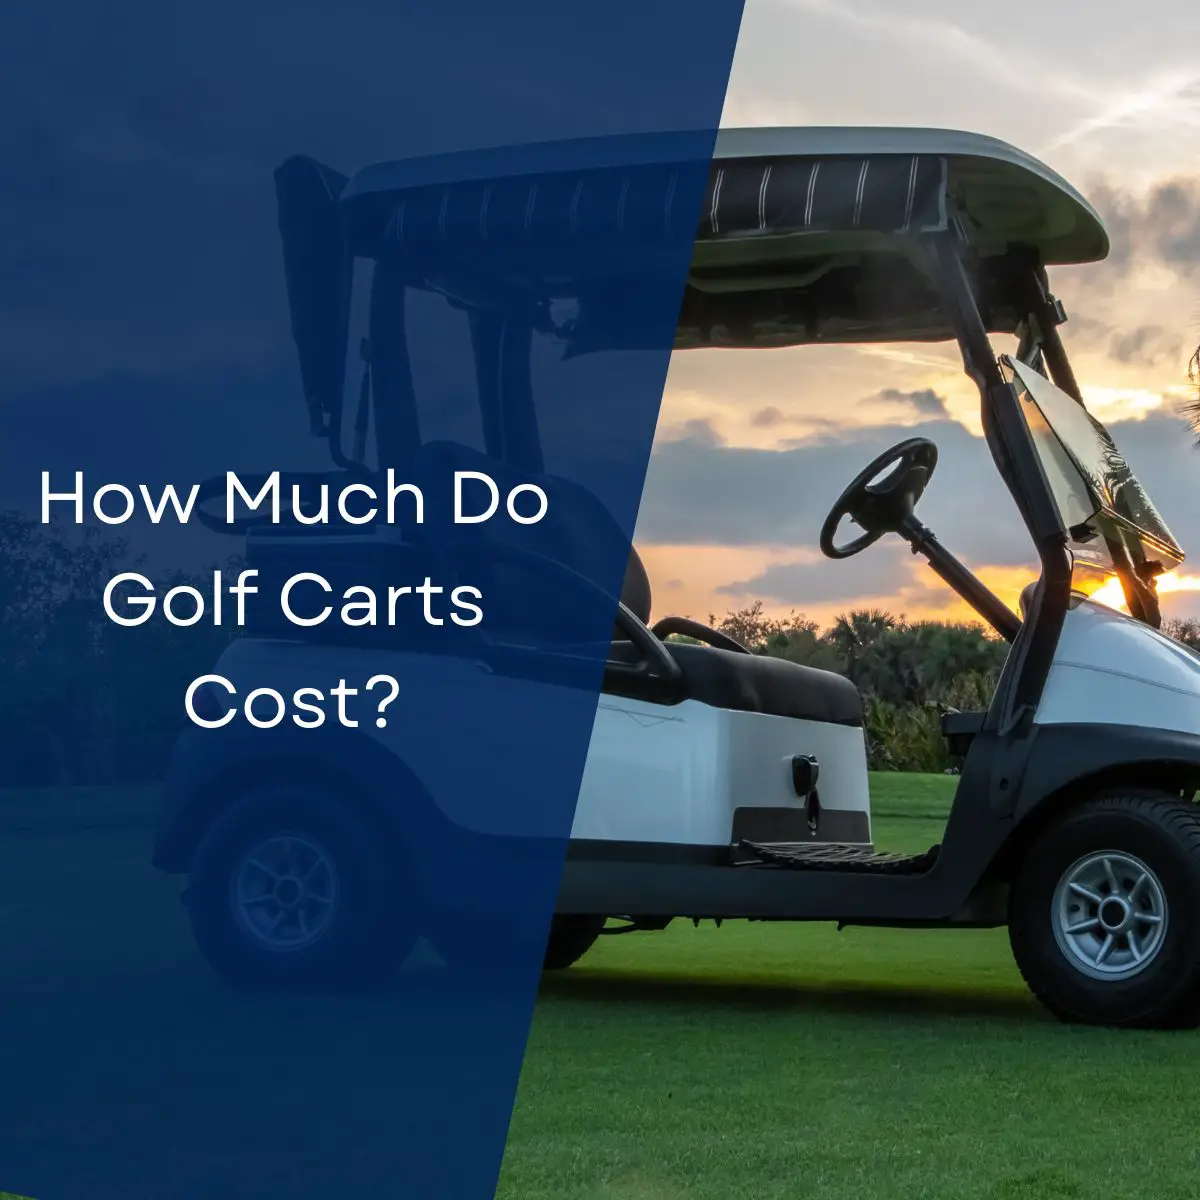 How Much Do Golf Carts Cost?